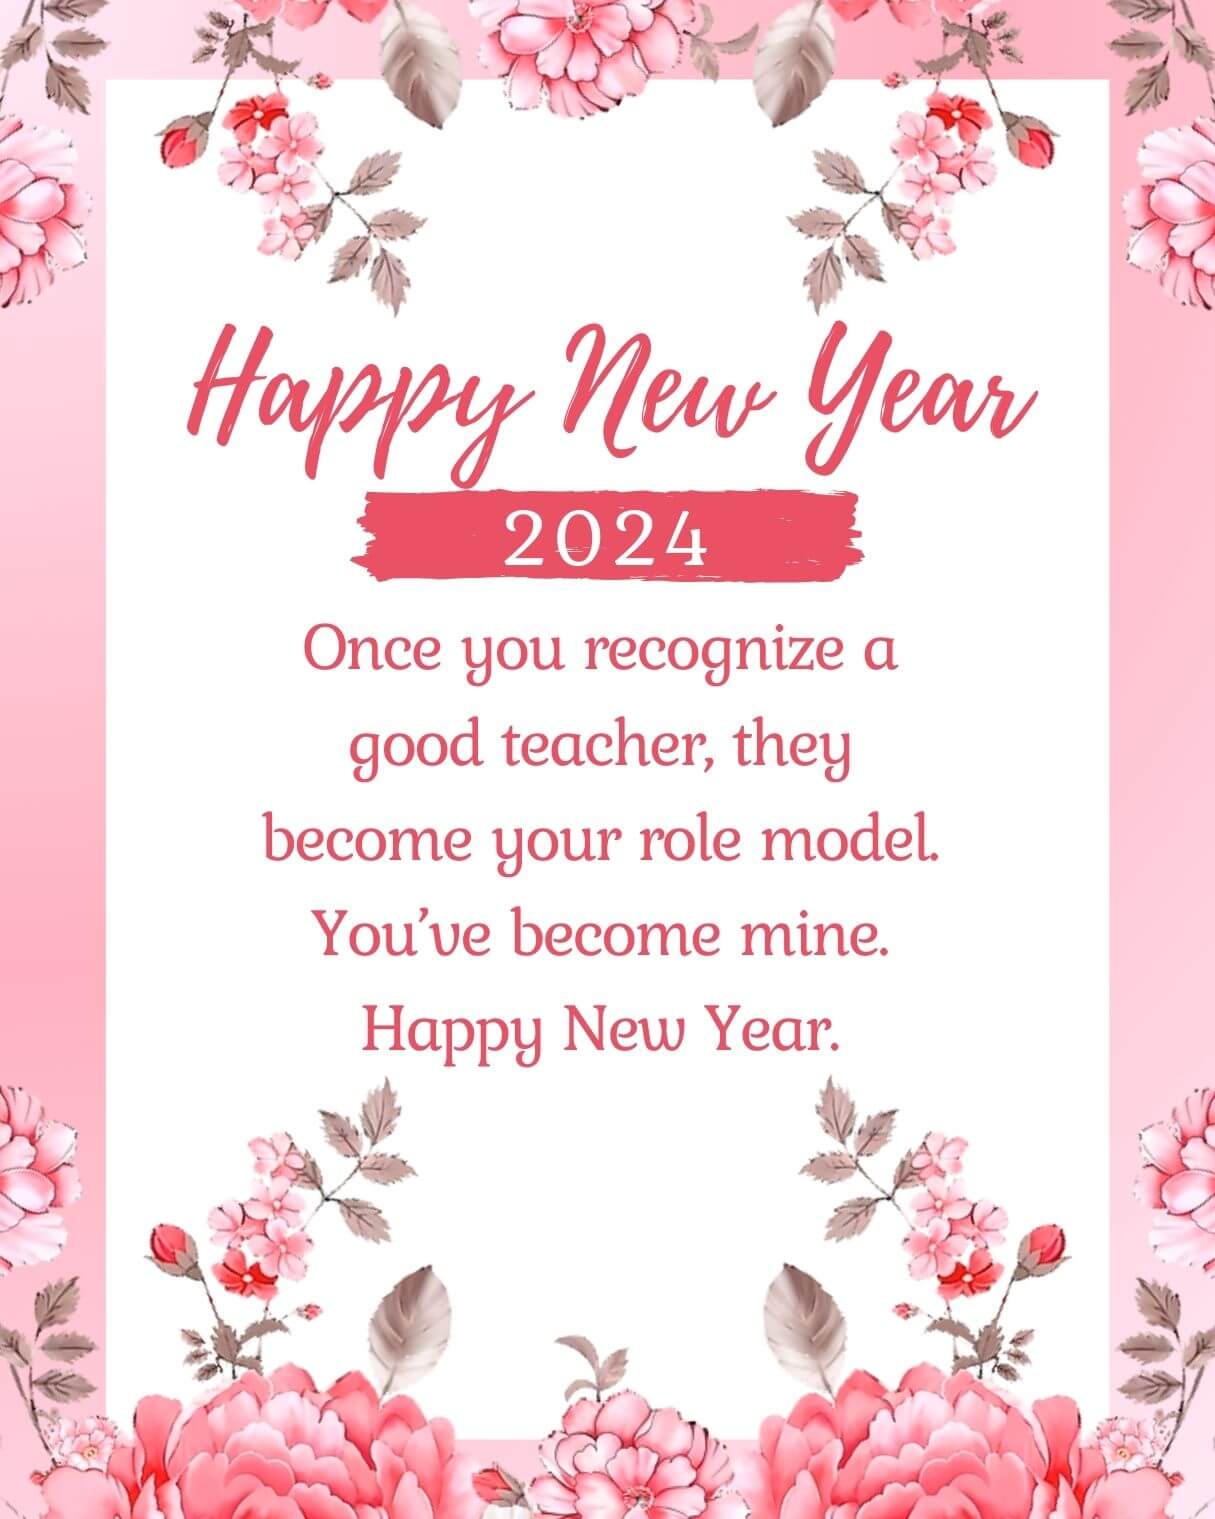 Happy New Year Wishes For Teachers 2024